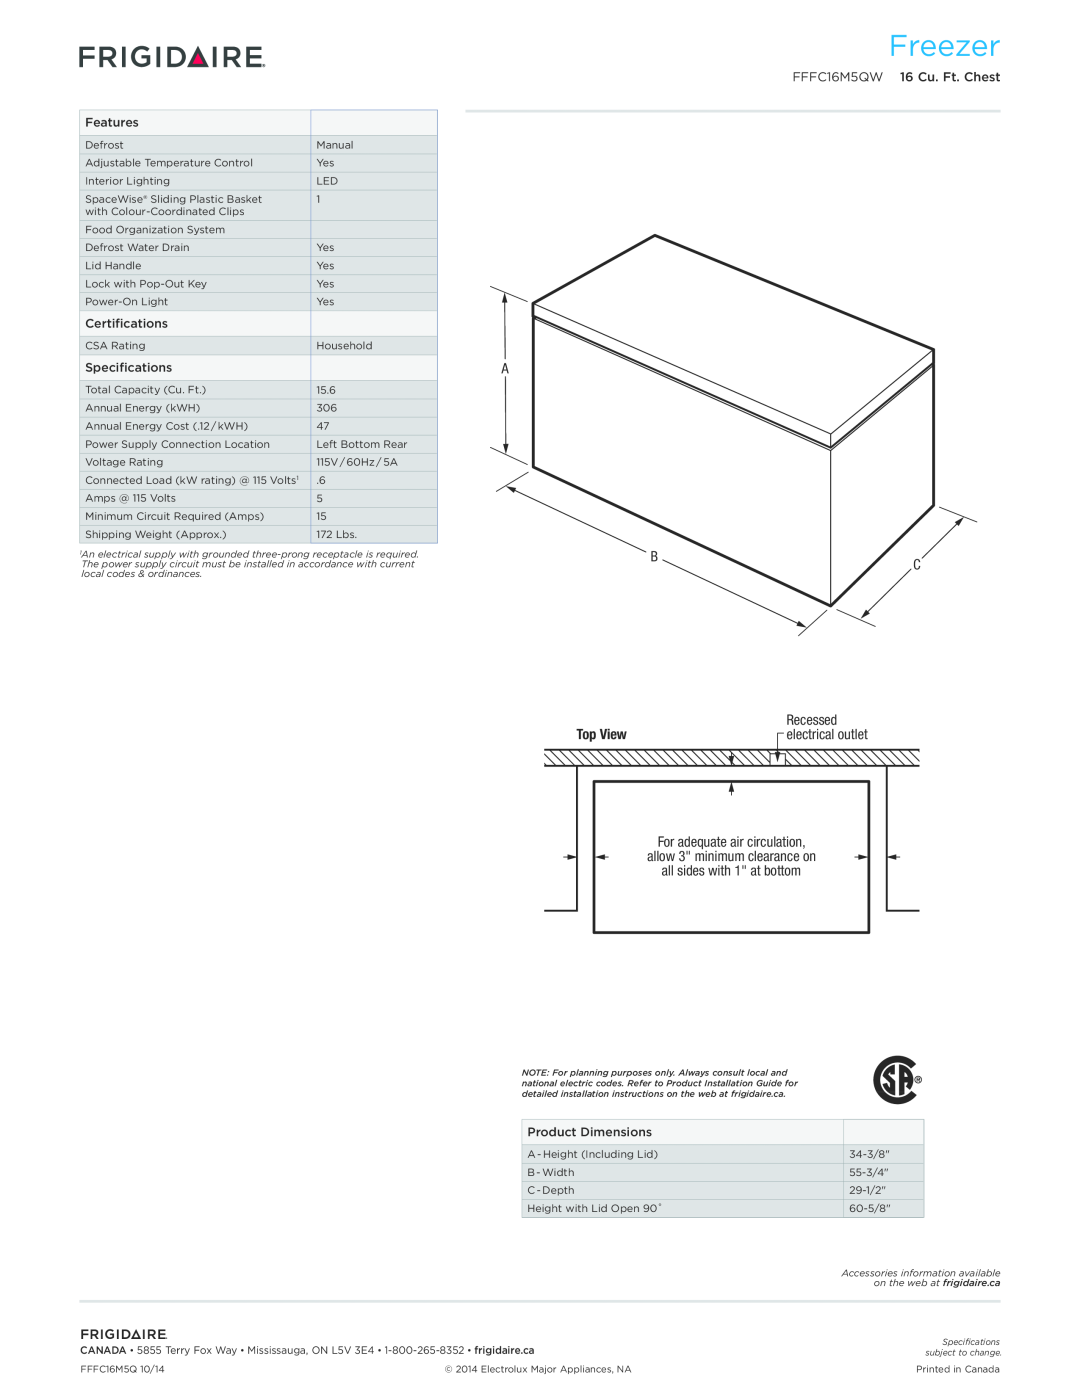 Frigidaire dimensions Freezer, Top View, Recessed, FFFC16M5QW 16 Cu. Ft. Chest, Features, Certifications, Specifications 